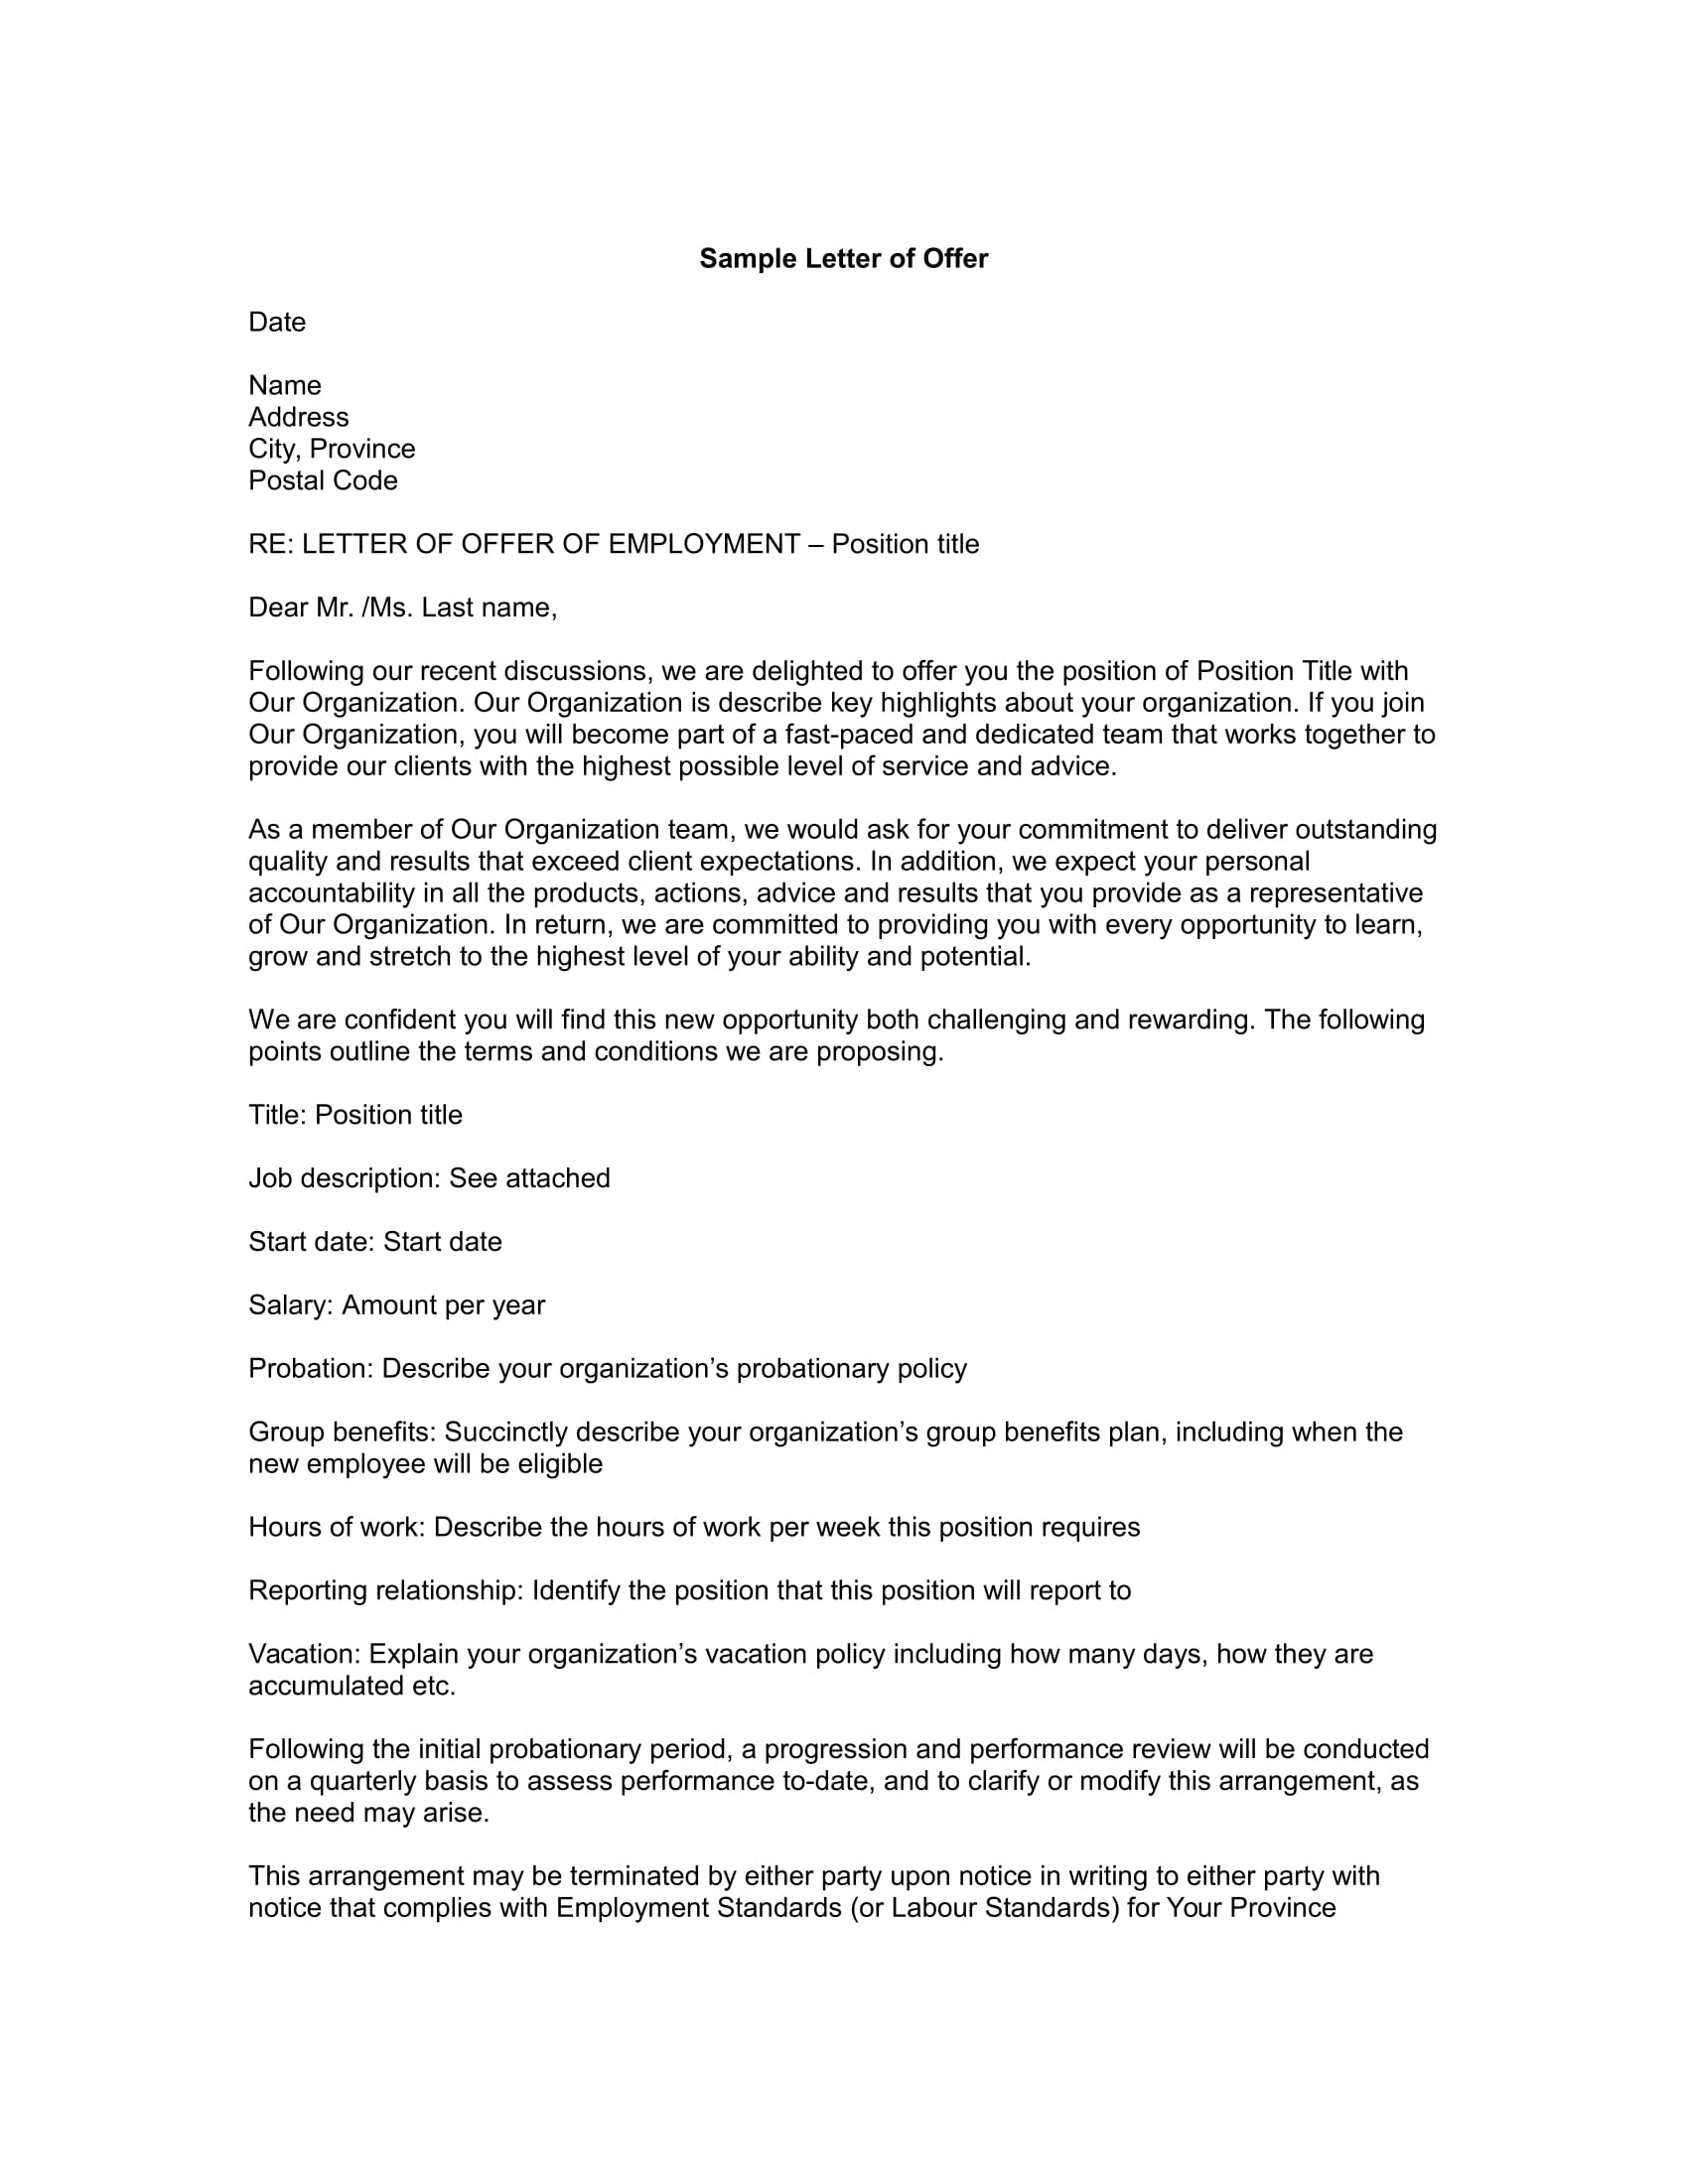 employment offer letter example 1